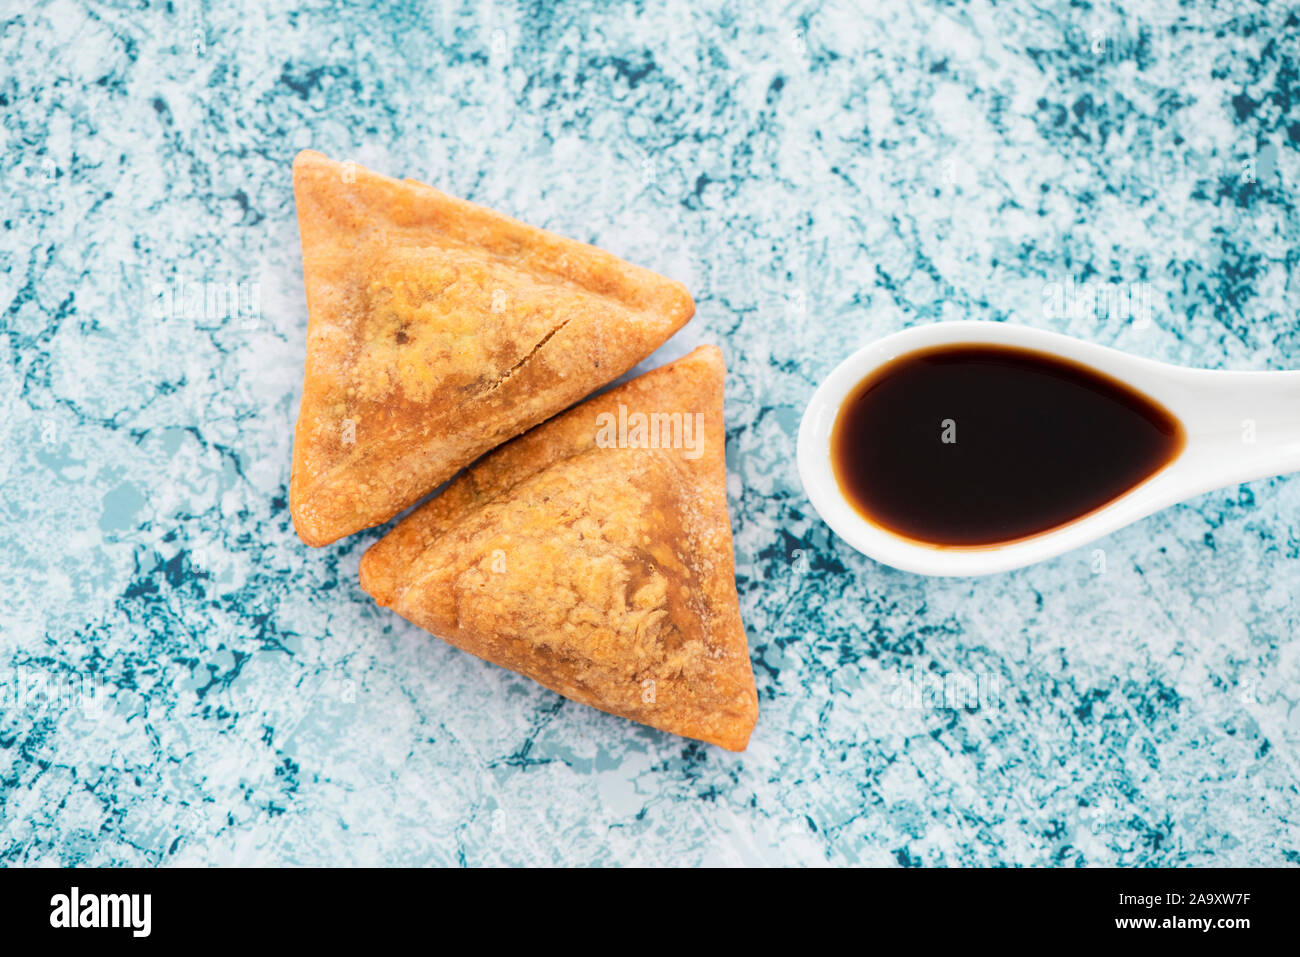 high angle view of some Indian samosas and a ceramic spoon with a dark sauce on a marbled stone surface Stock Photo